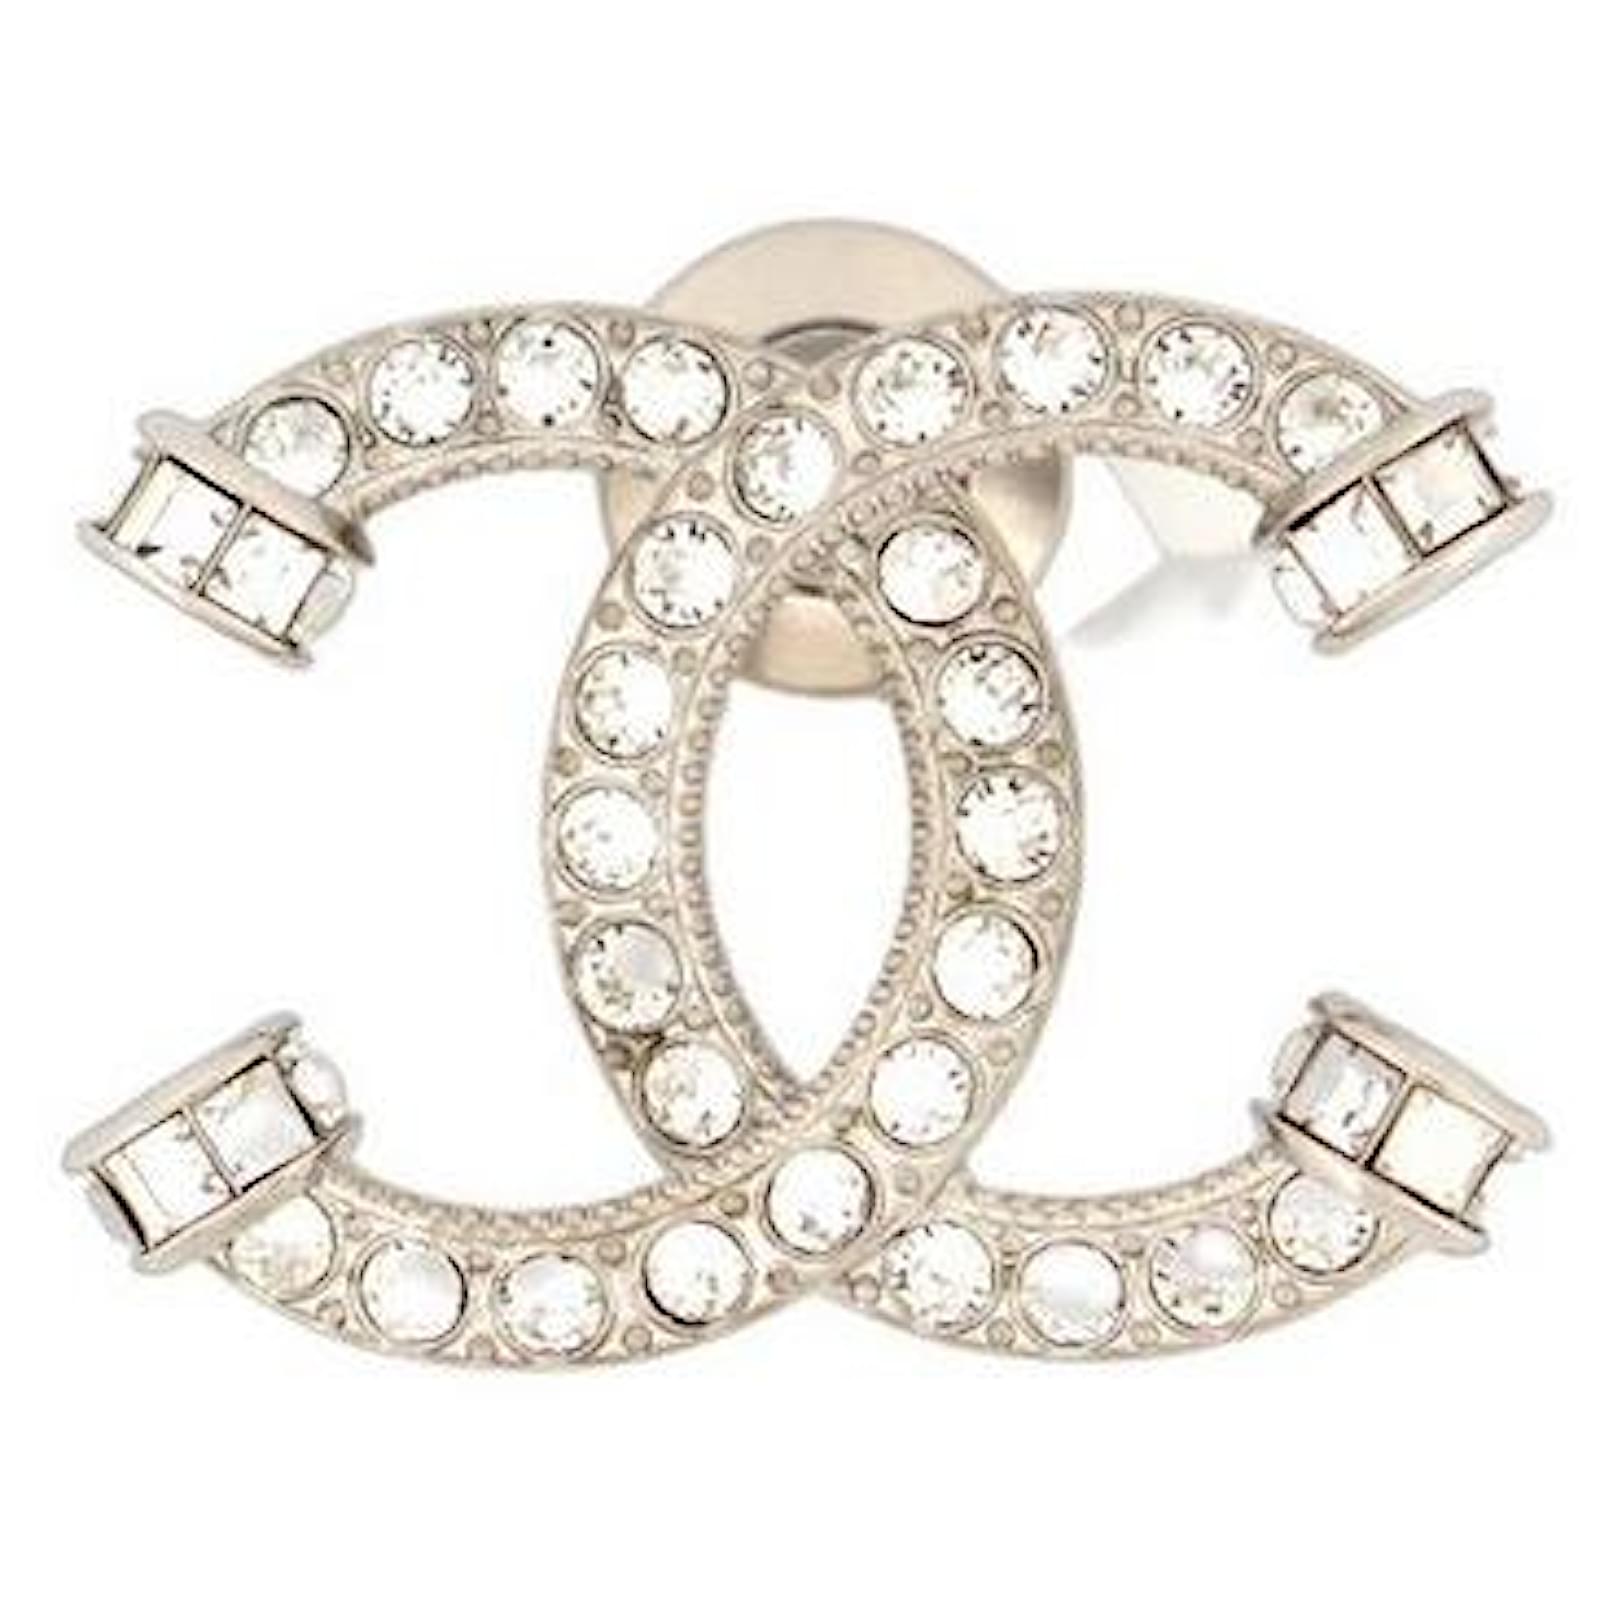 Chanel Crystal, Strass and Pale Gold Metal CC Star Brooch , Contemporary Jewelry (Like New)